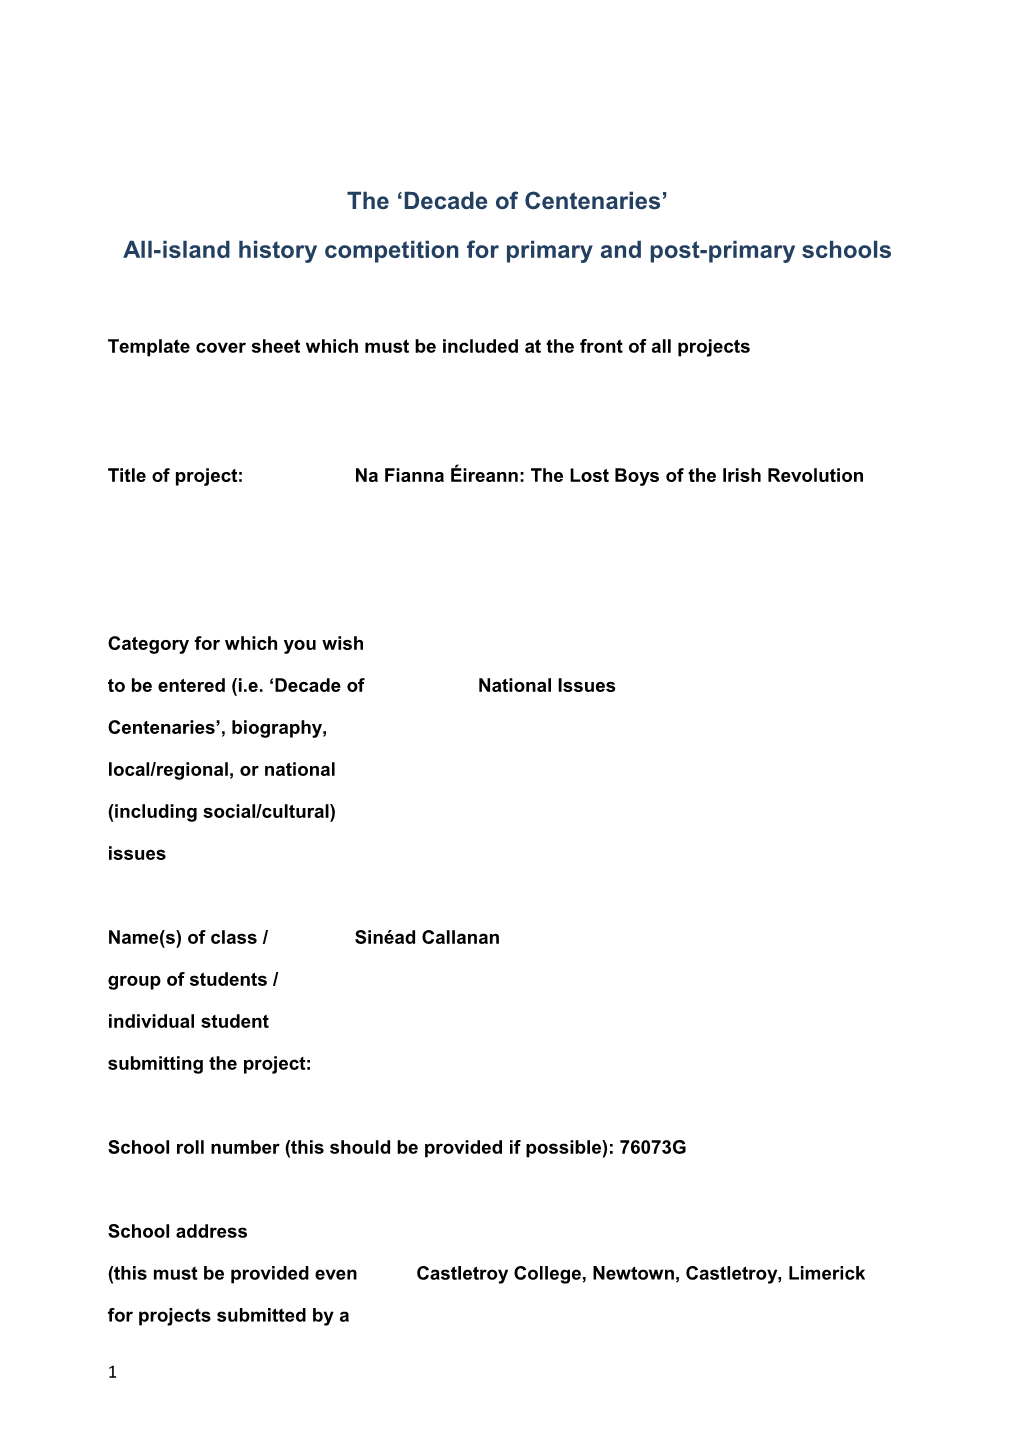 All-Island History Competition for Primary and Post-Primaryschools